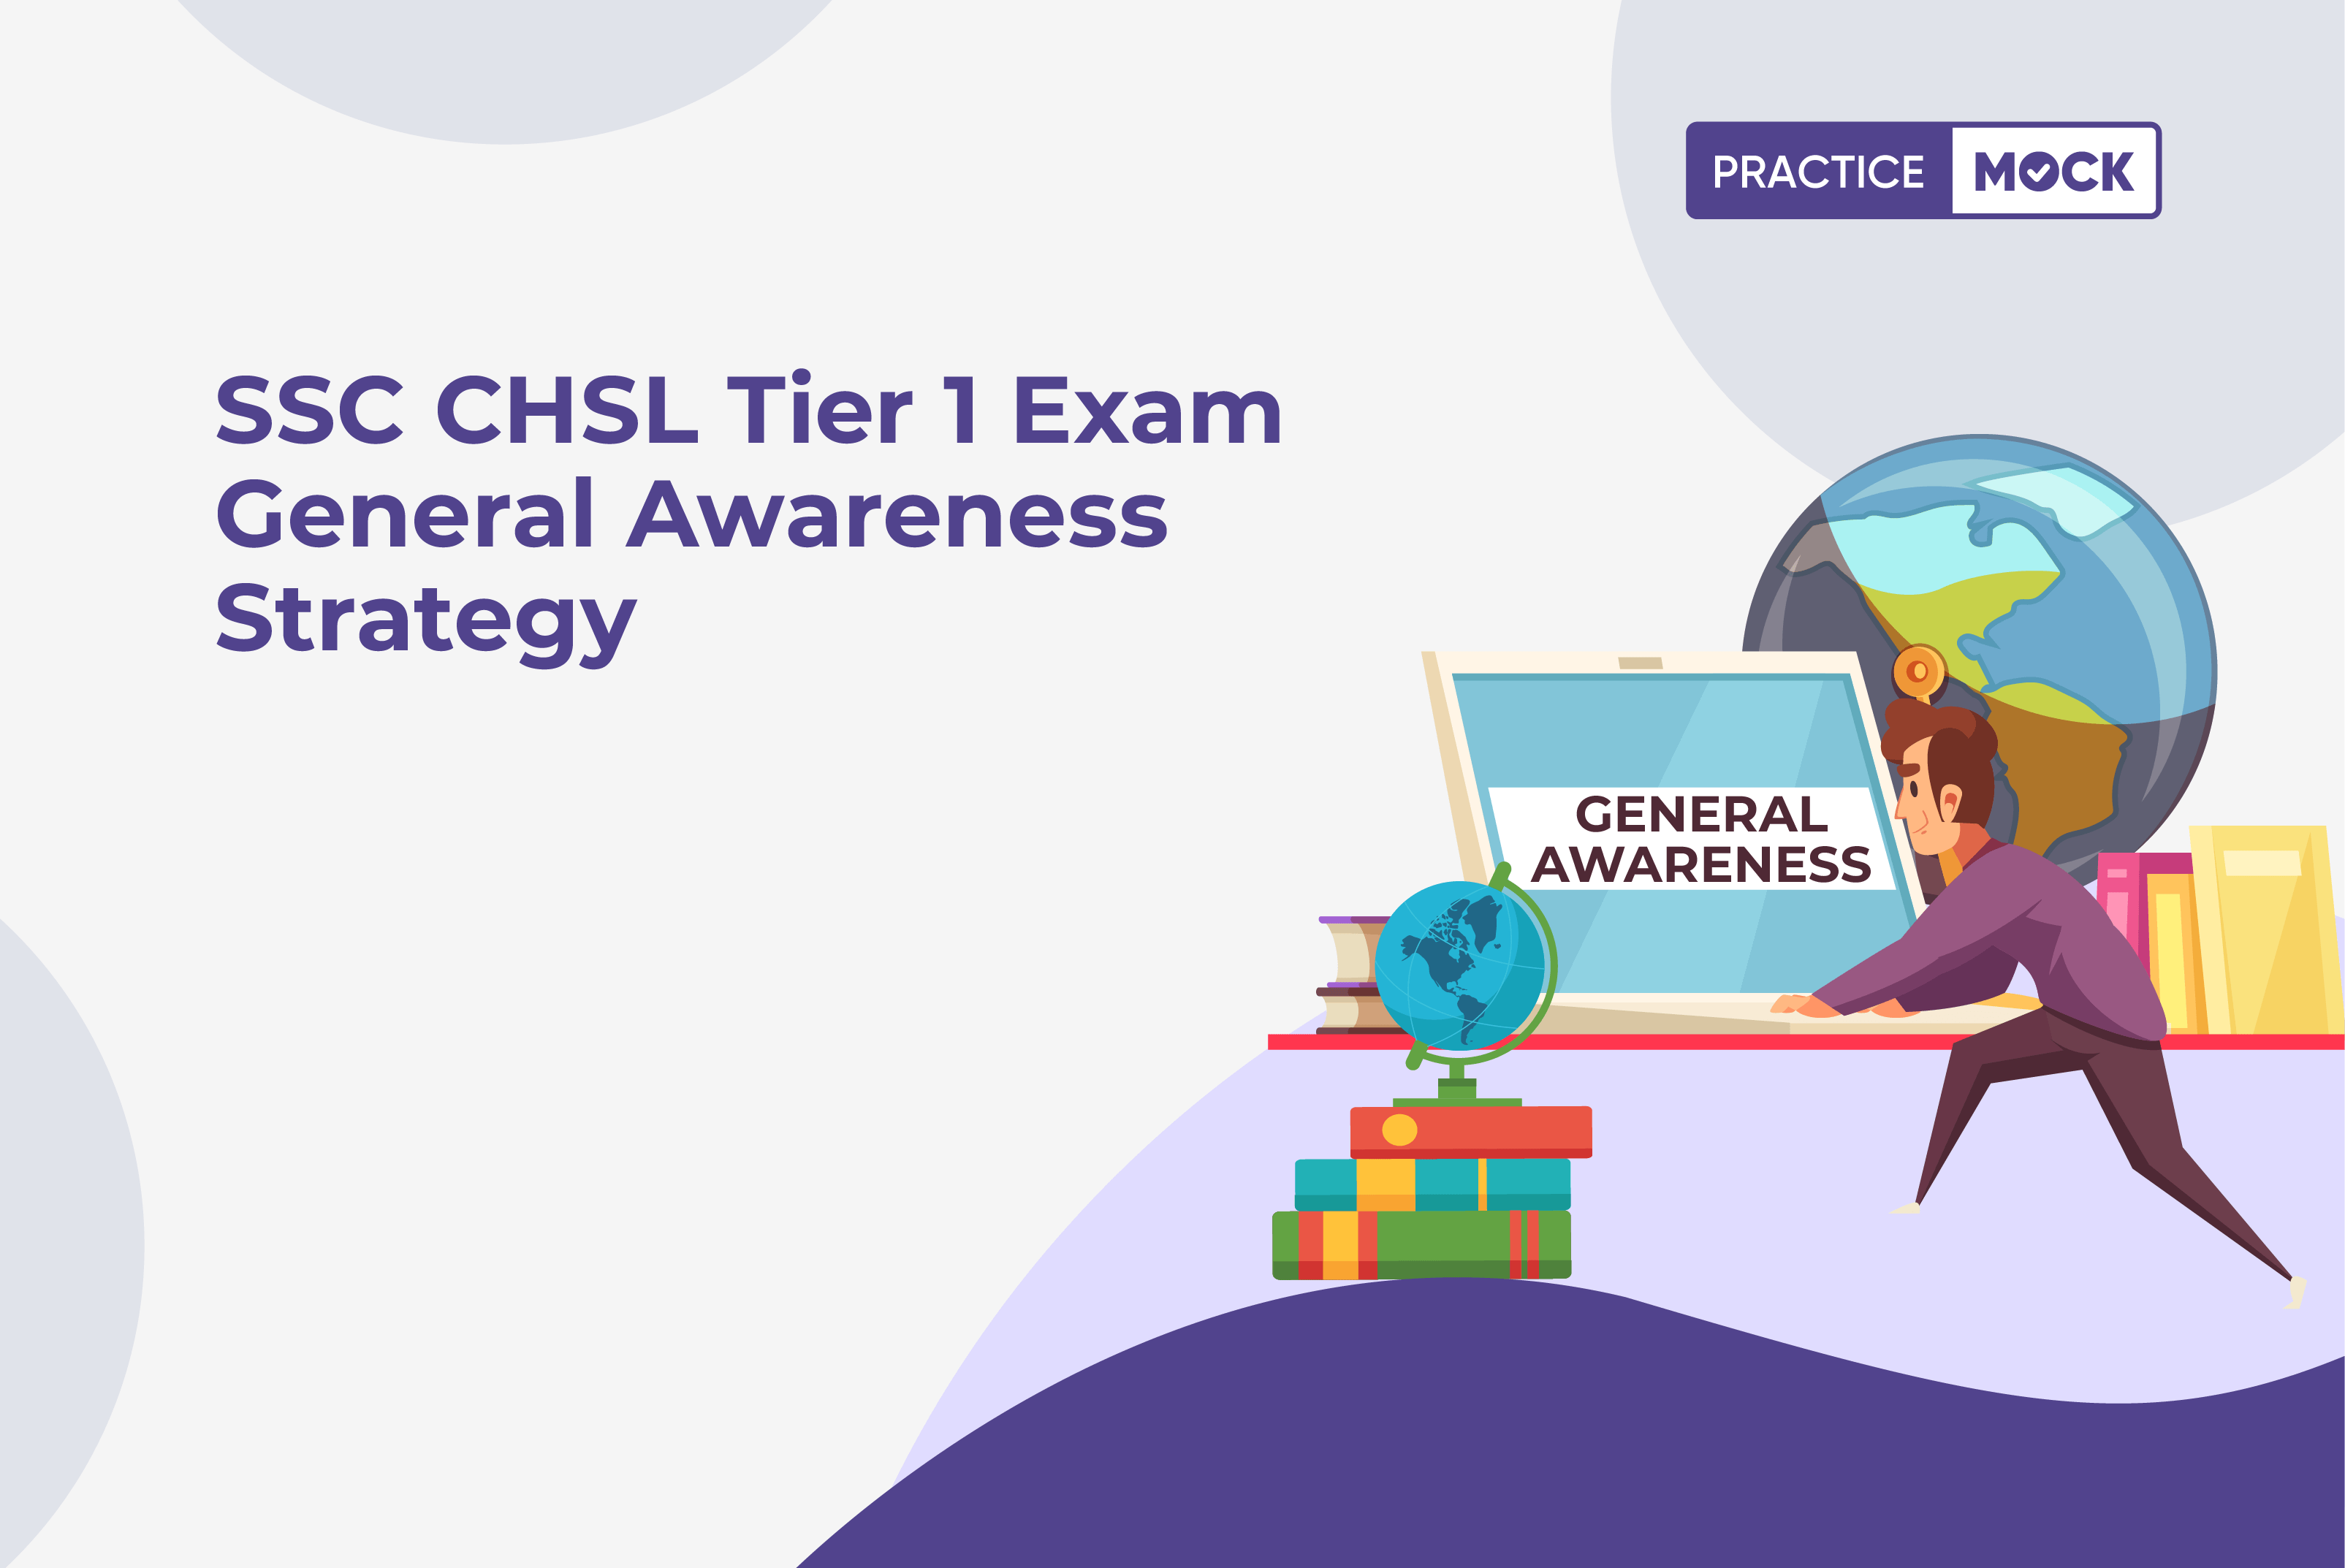 SSC CHSL Tier 1 2023 Exam-How to Score Full Marks in General Awareness?